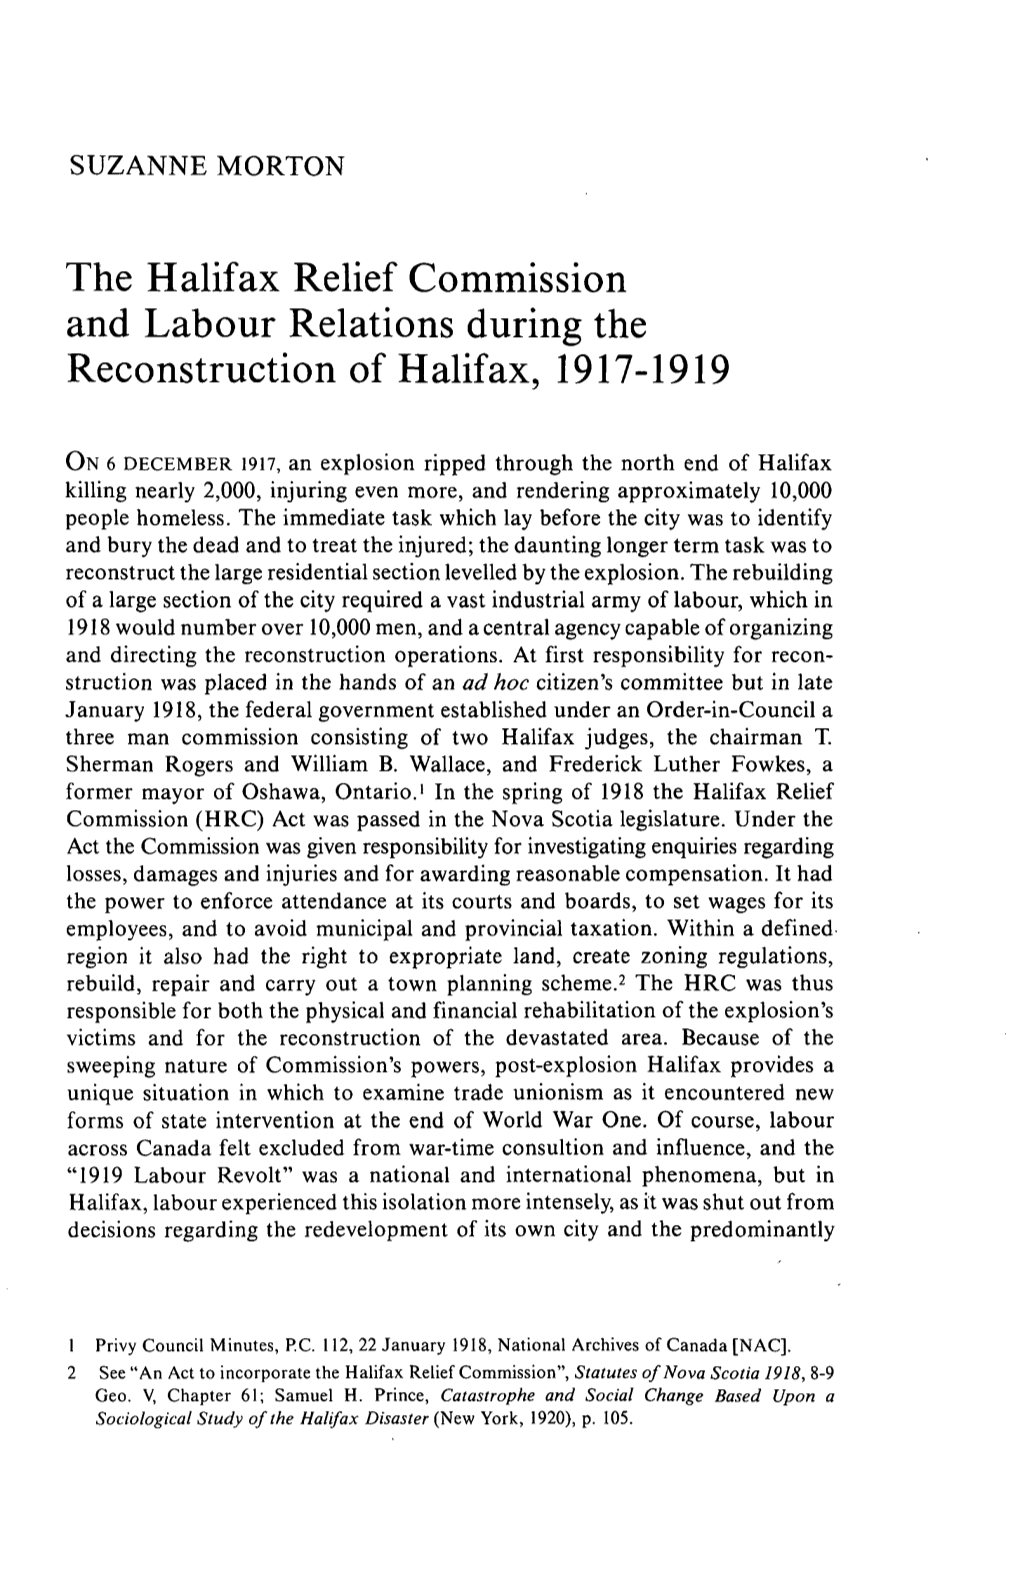 The Halifax Relief Commission and Labour Relations During the Reconstruction of Halifax, 1917-1919